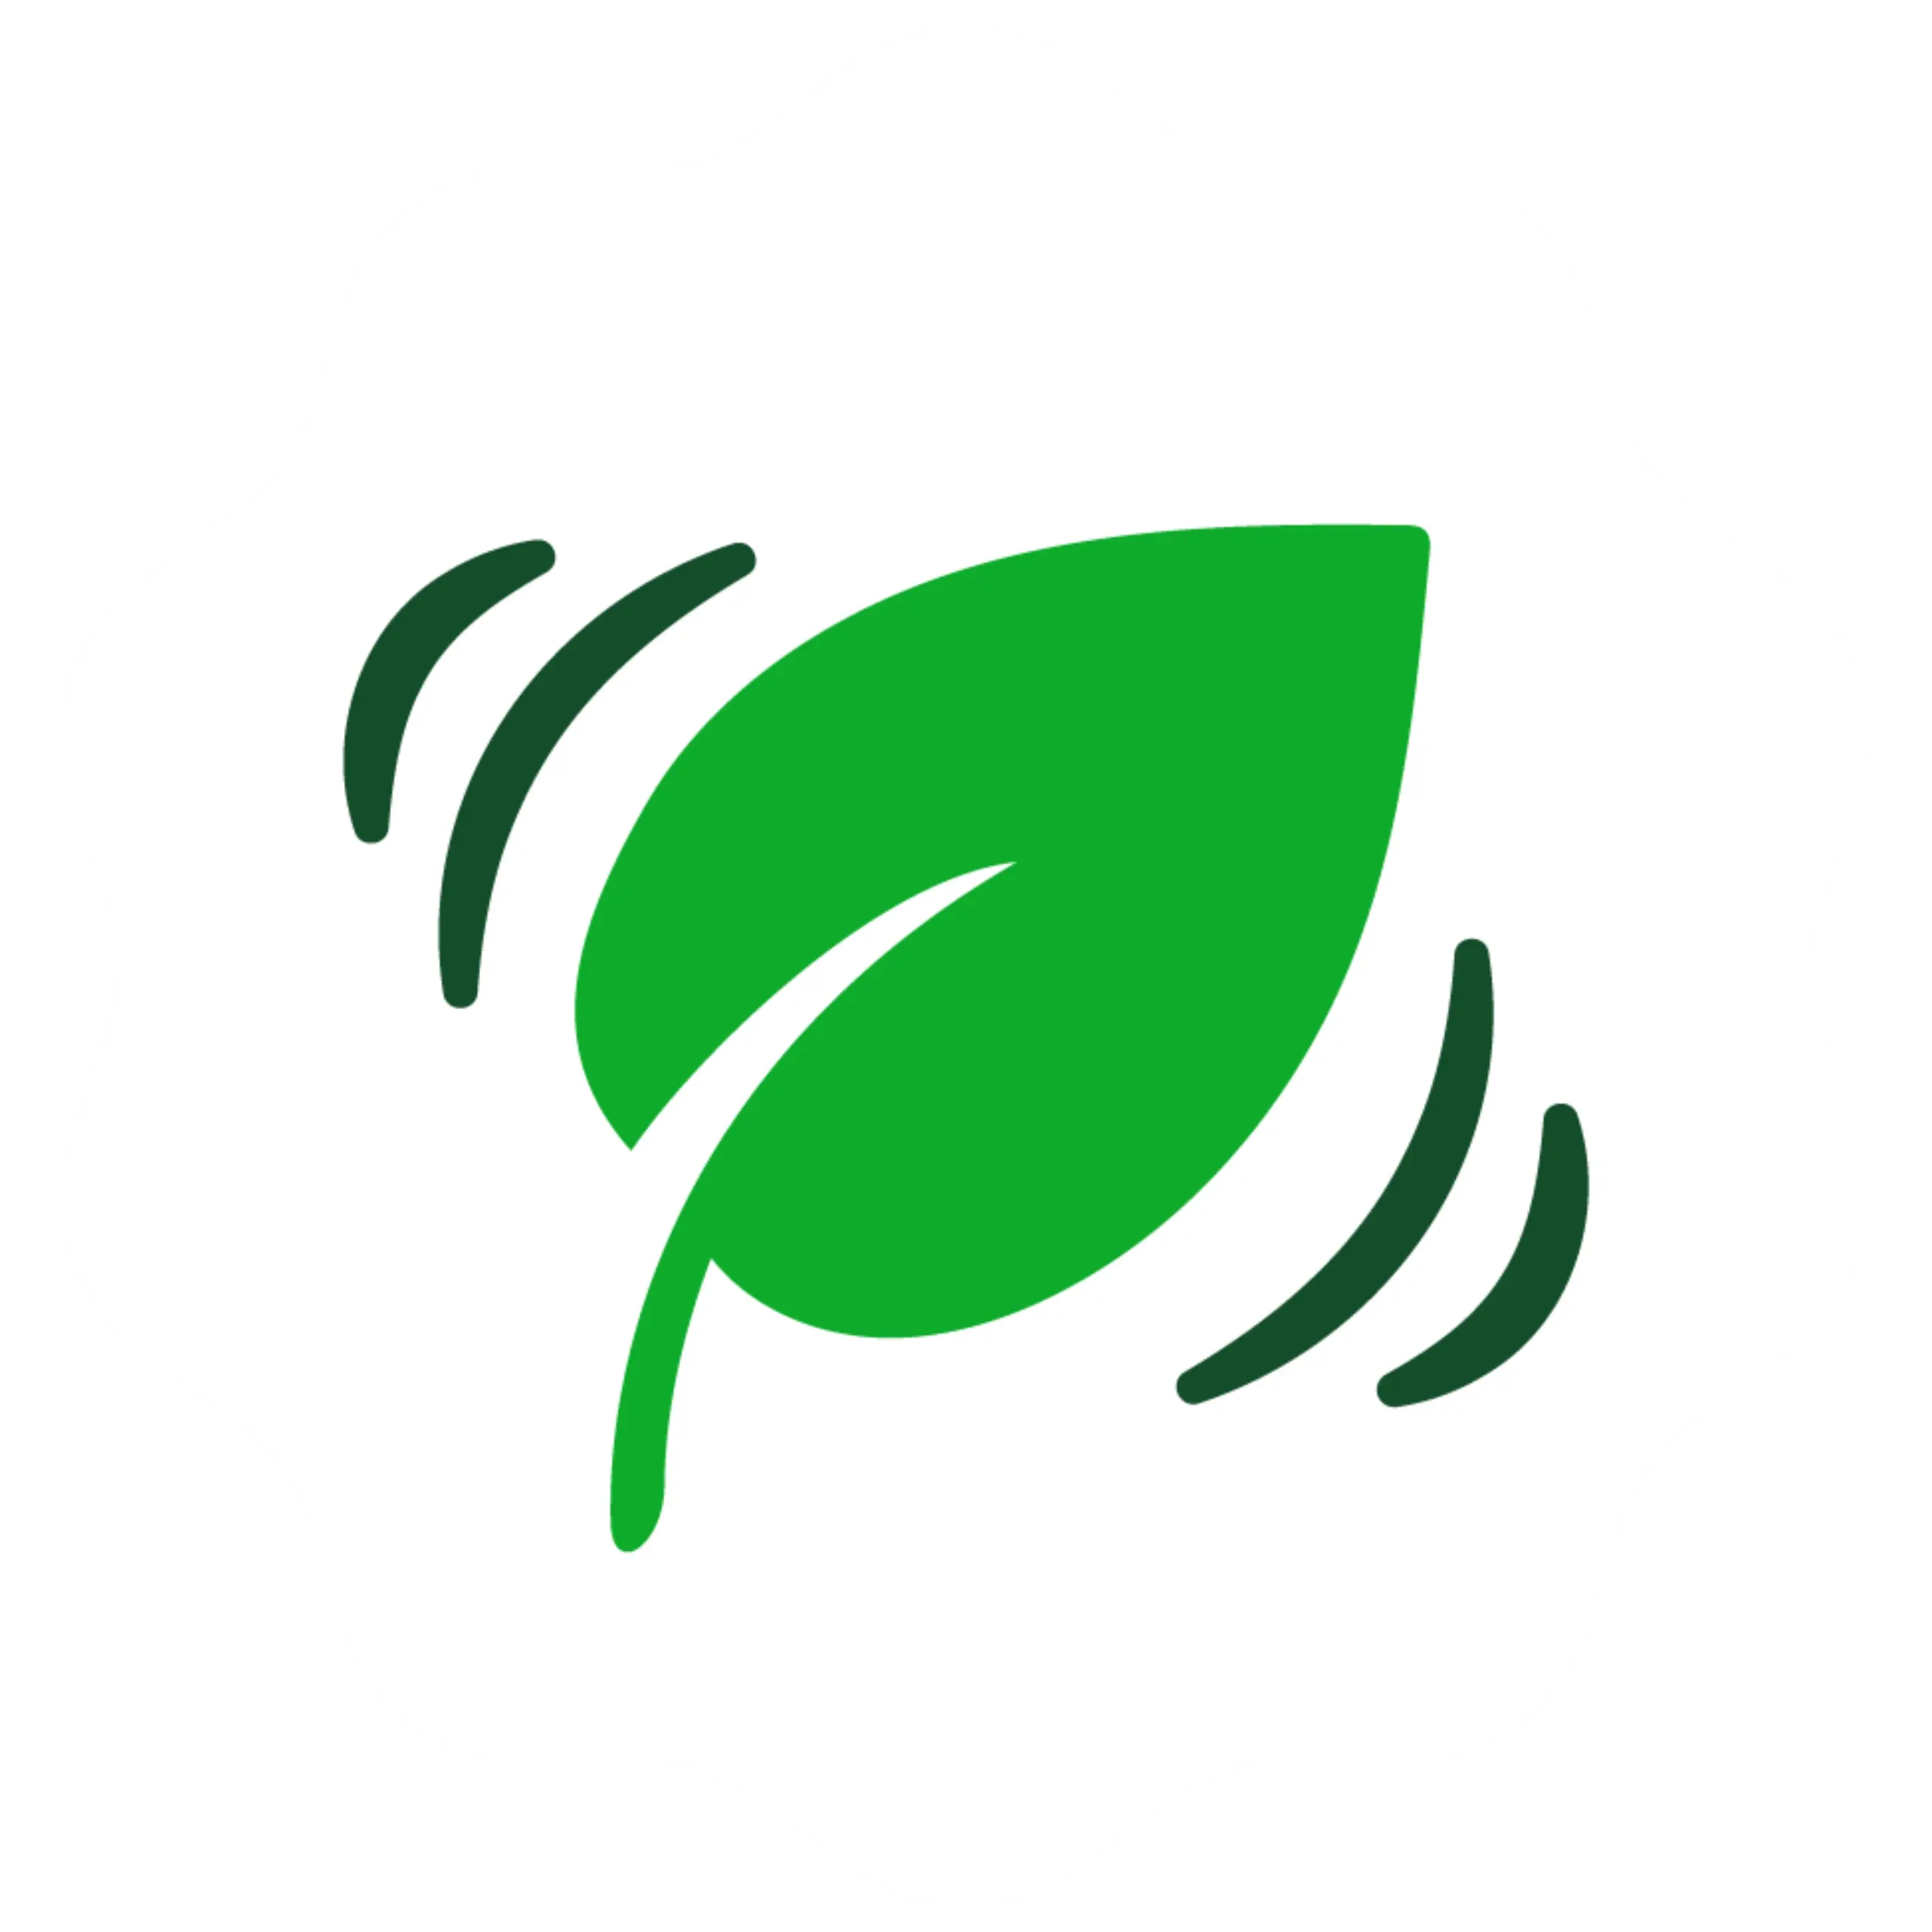  An icon of a green leaf over a white background